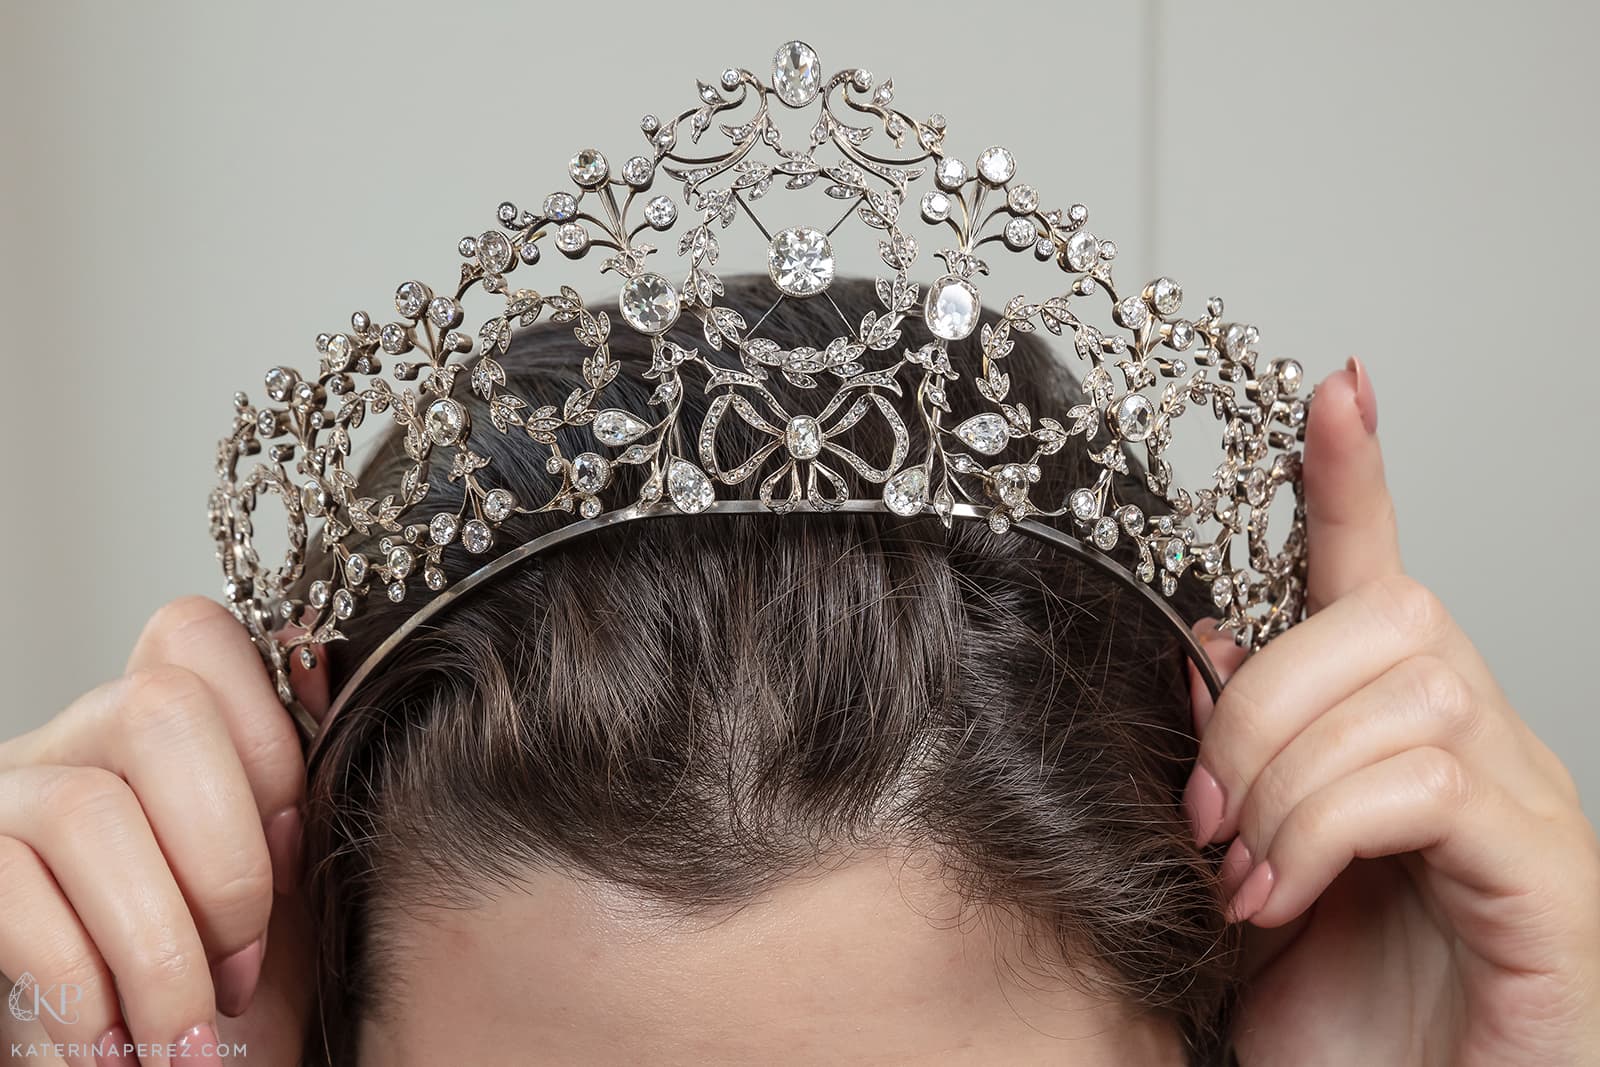 A Belle Époque tiara with approximately 25 carats of old brilliant, oval, cushion and pear-cut diamonds, circa 1905, attributed to Giuseppe Knight, featured in the Bonhams London Jewels auction of September 2021